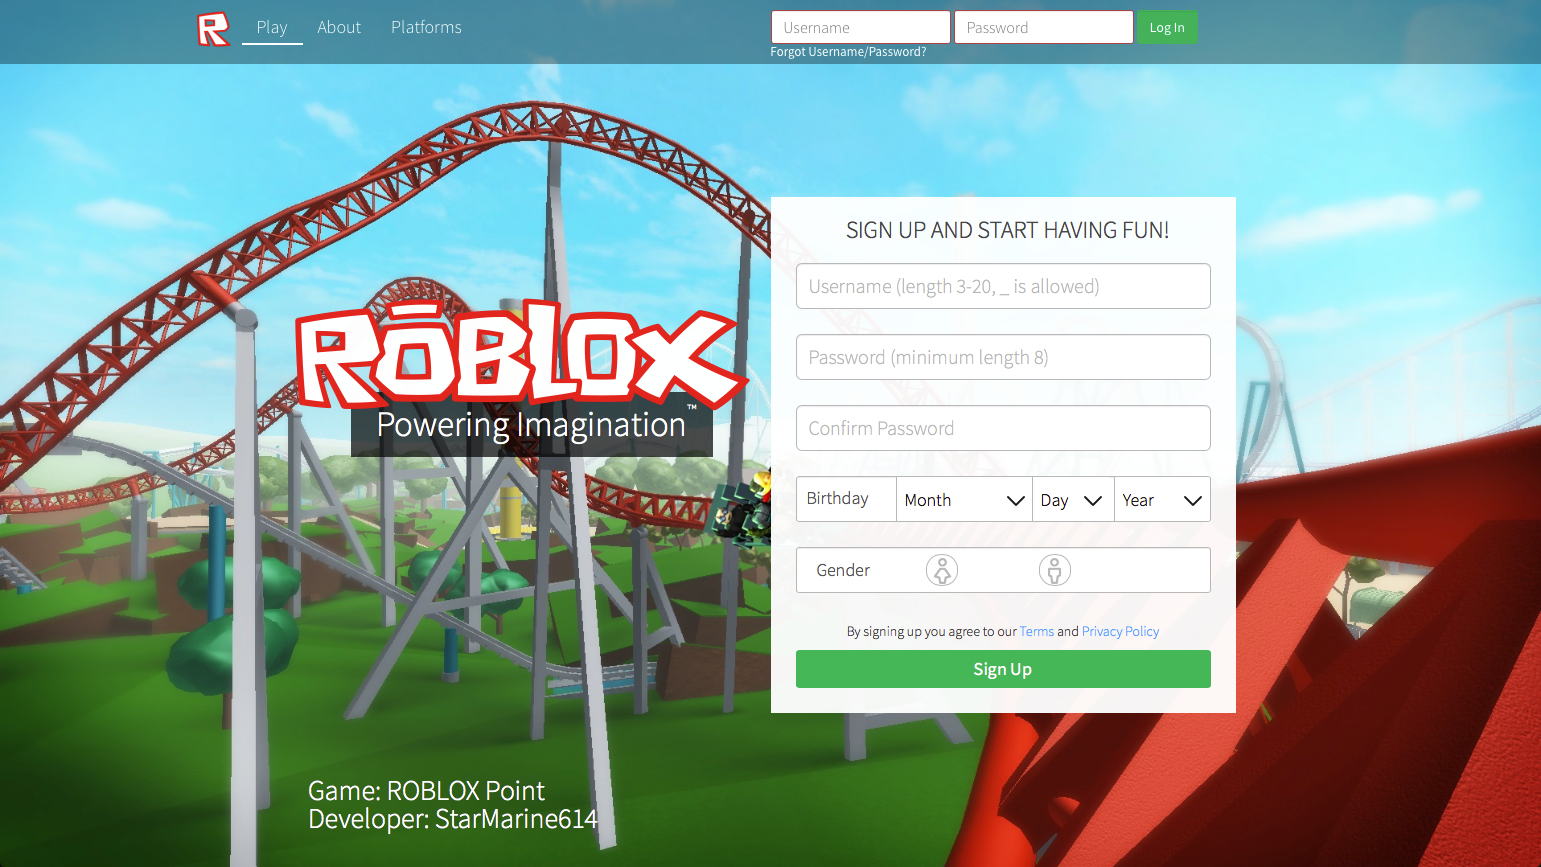 Web Roblox Com Under 13 Player Experience Is Certified By The Kidsafe Seal Program